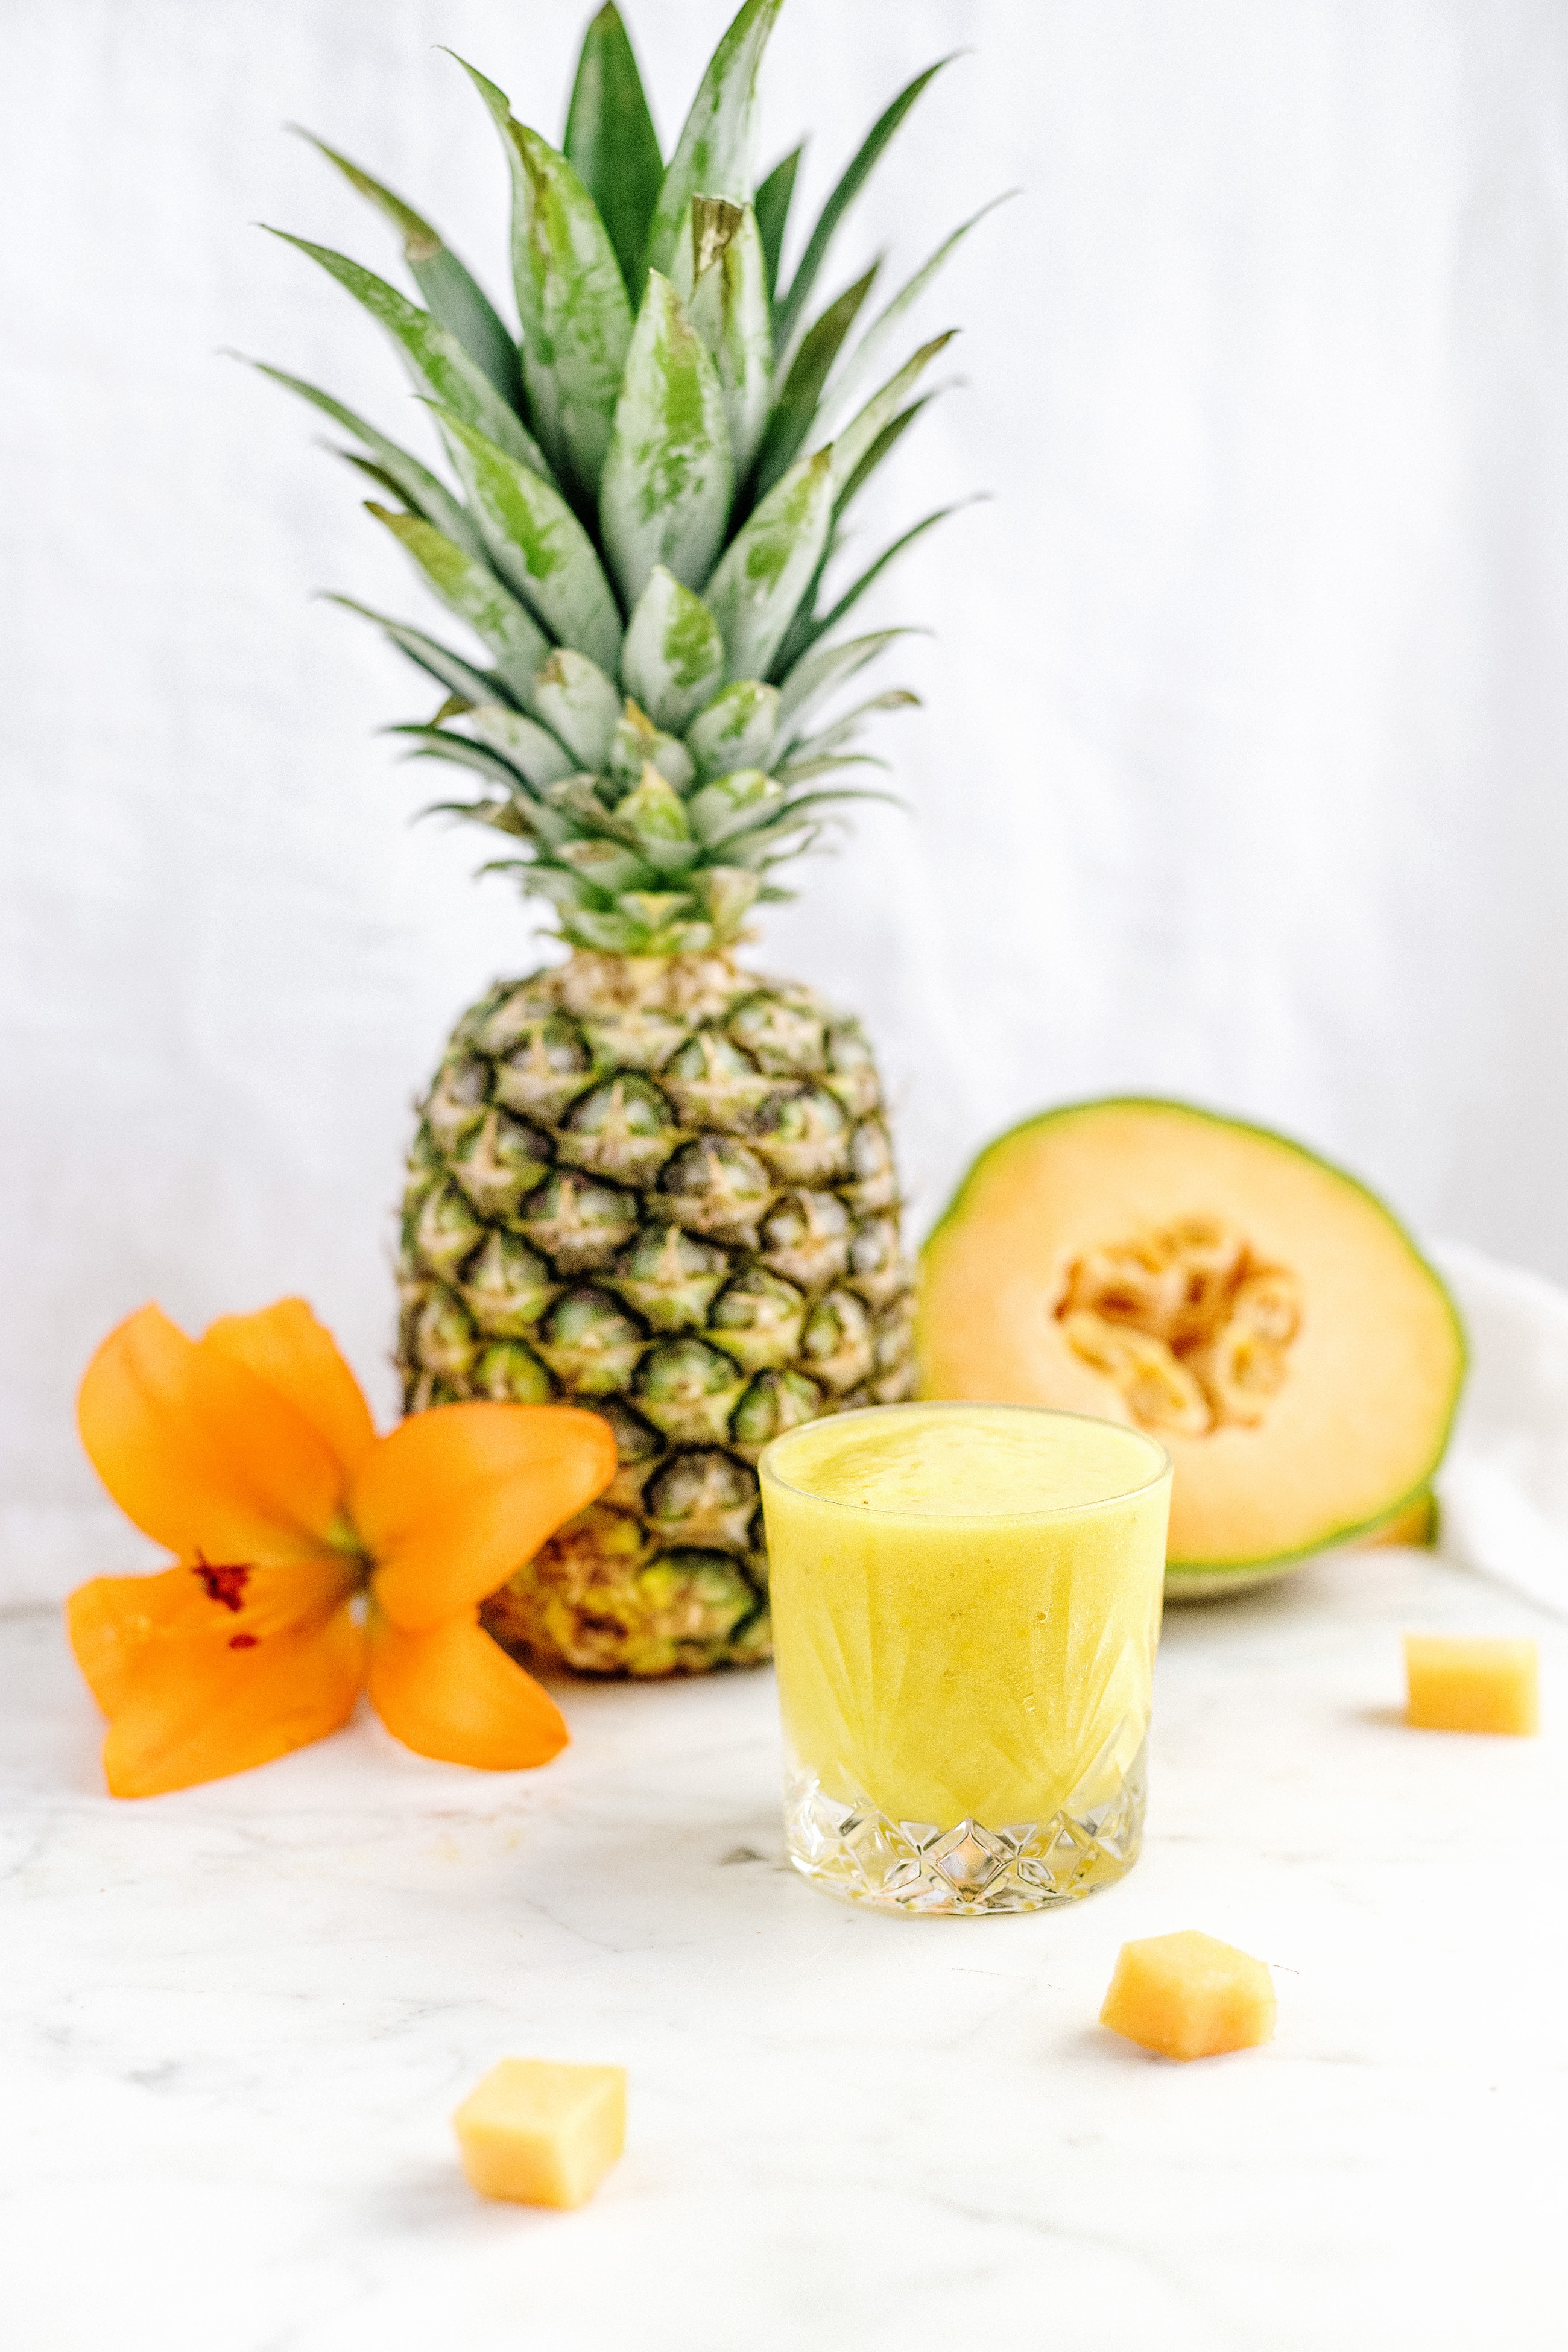 How to make a Kale Pineapple Smoothie – Easy Recipe